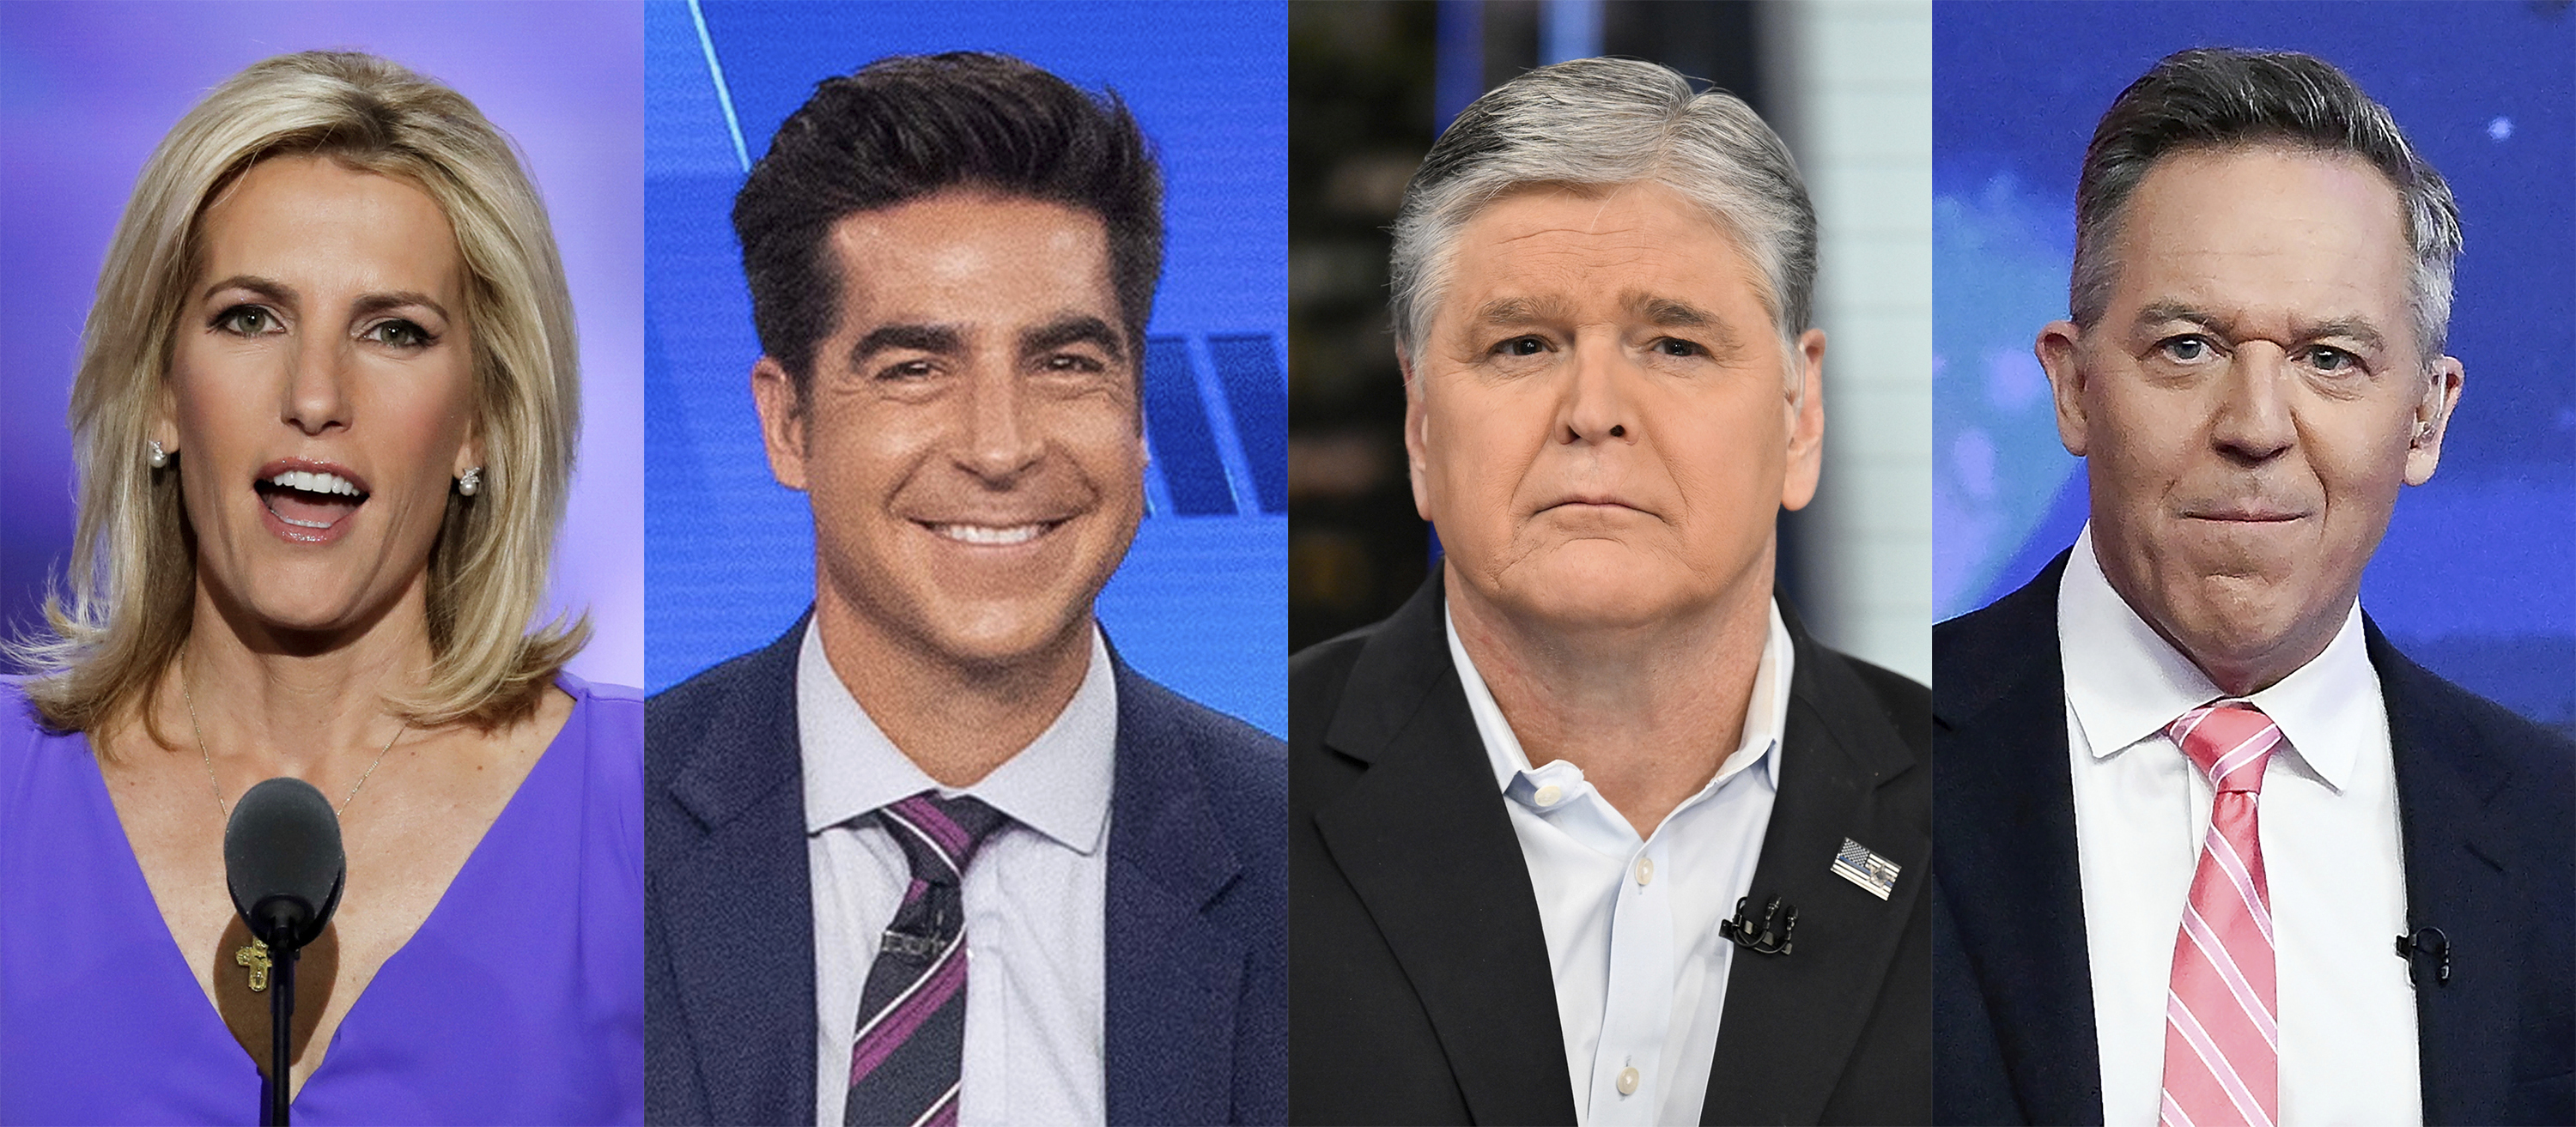 Fox News unveils primetime lineup with Jesse Watters in Tucker Carlson's  former time slot